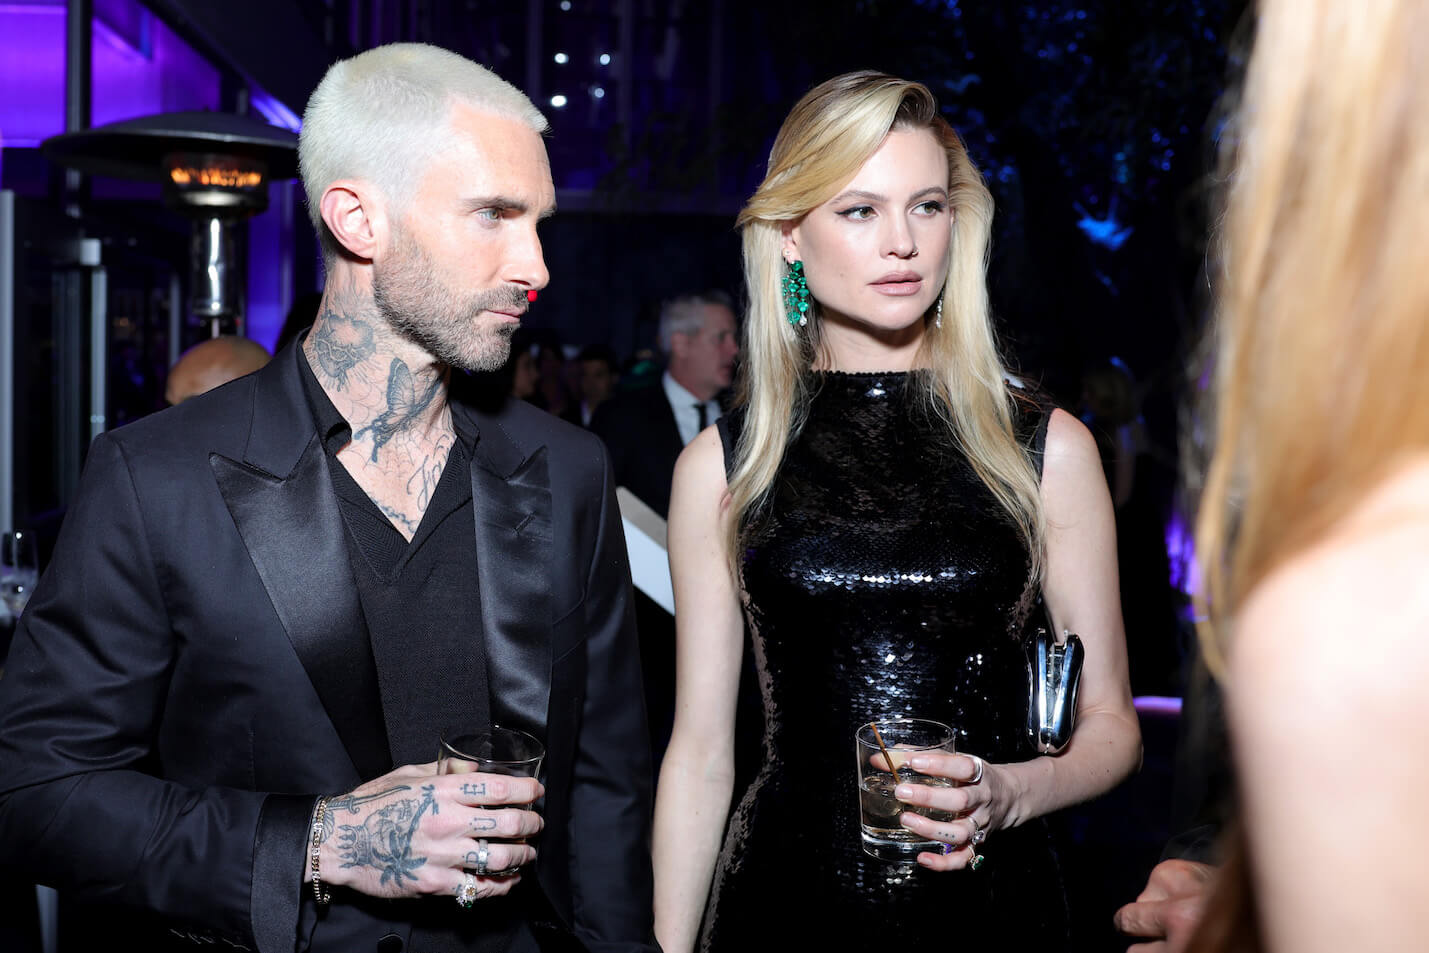 Adam Levine and Behati Prinsloo standing next to each other at an event